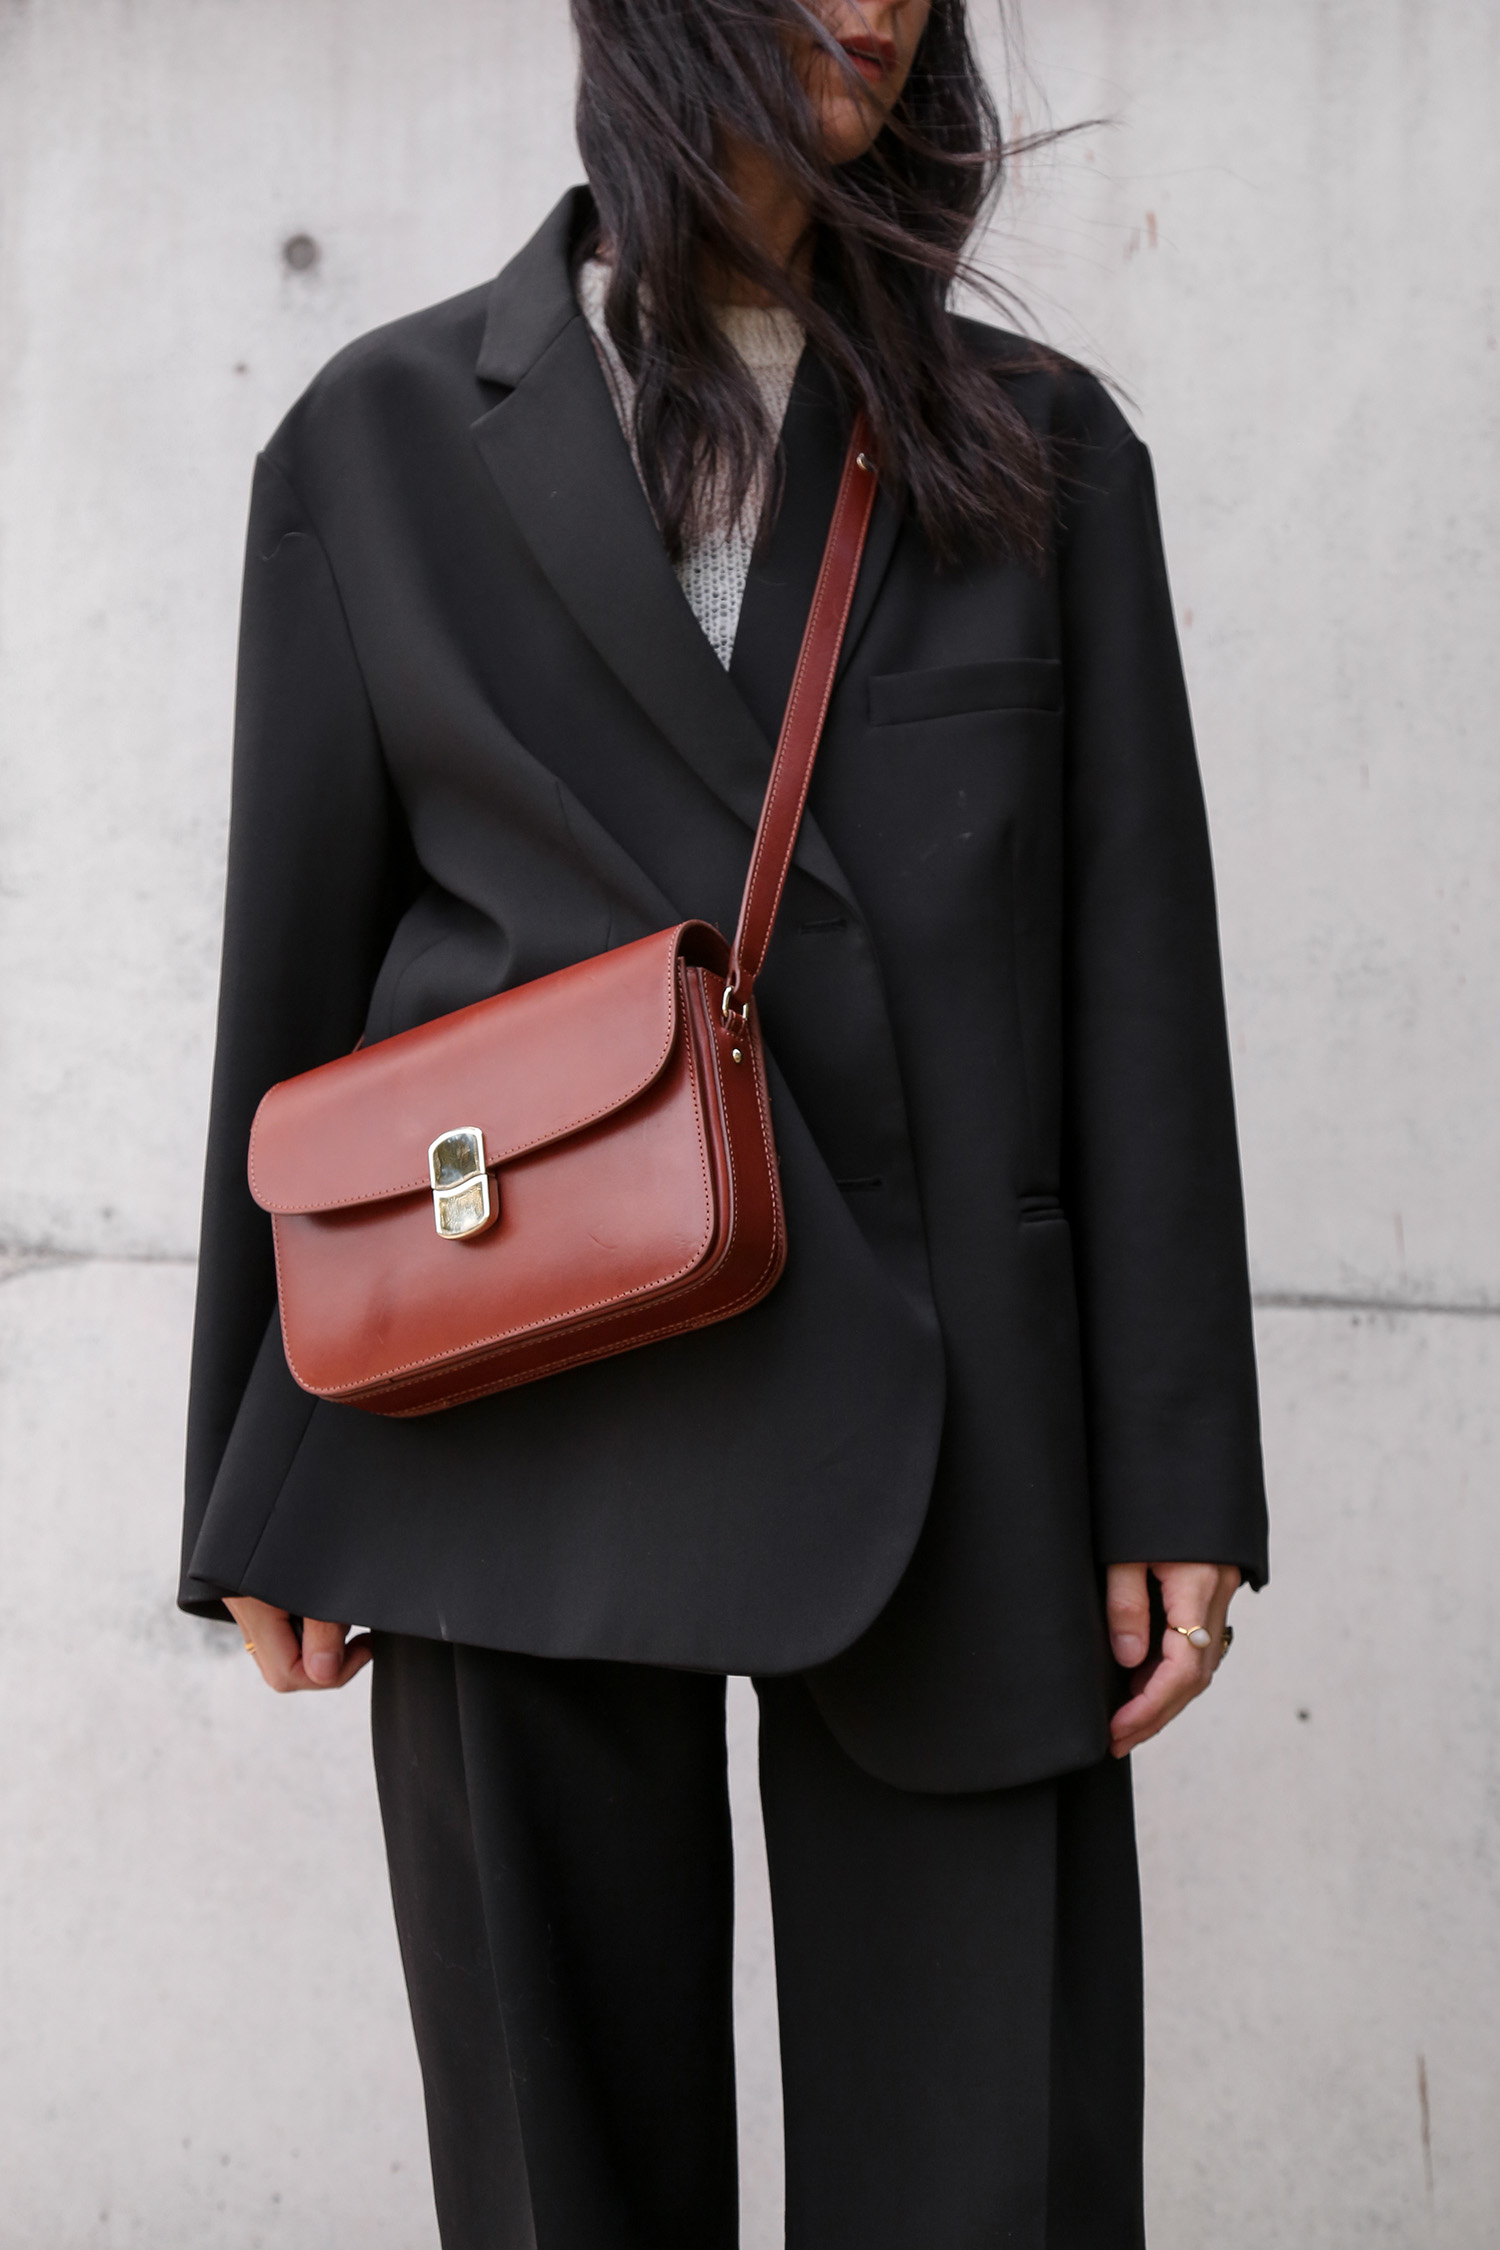 Minimal style all black outfit with tan bag